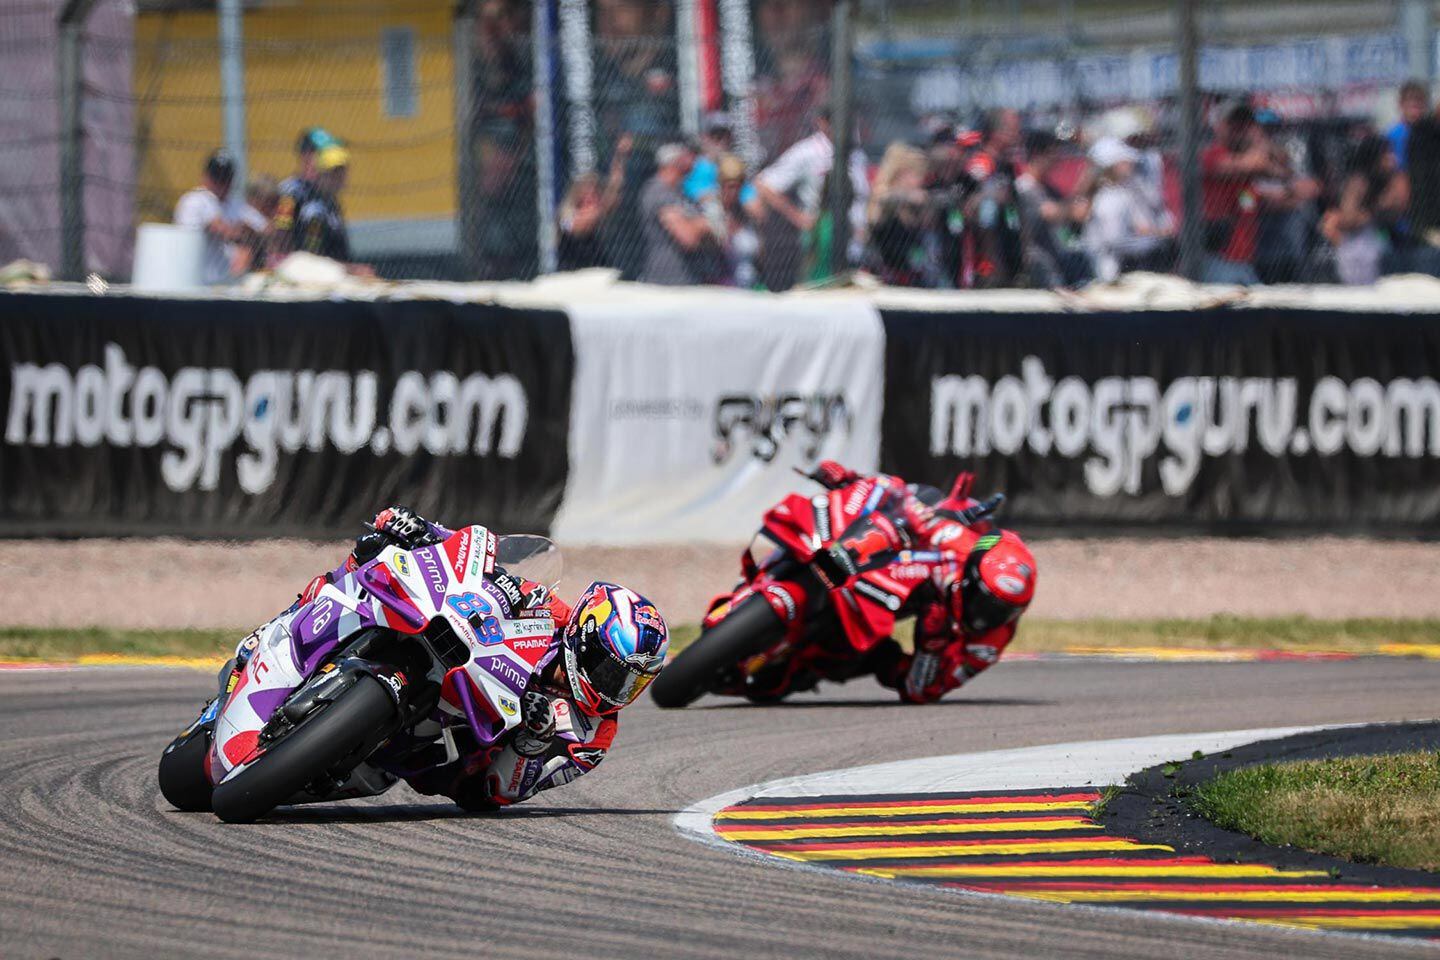 Jorge Martín managed tire wear brilliantly to come out on top at the Sachsenring.